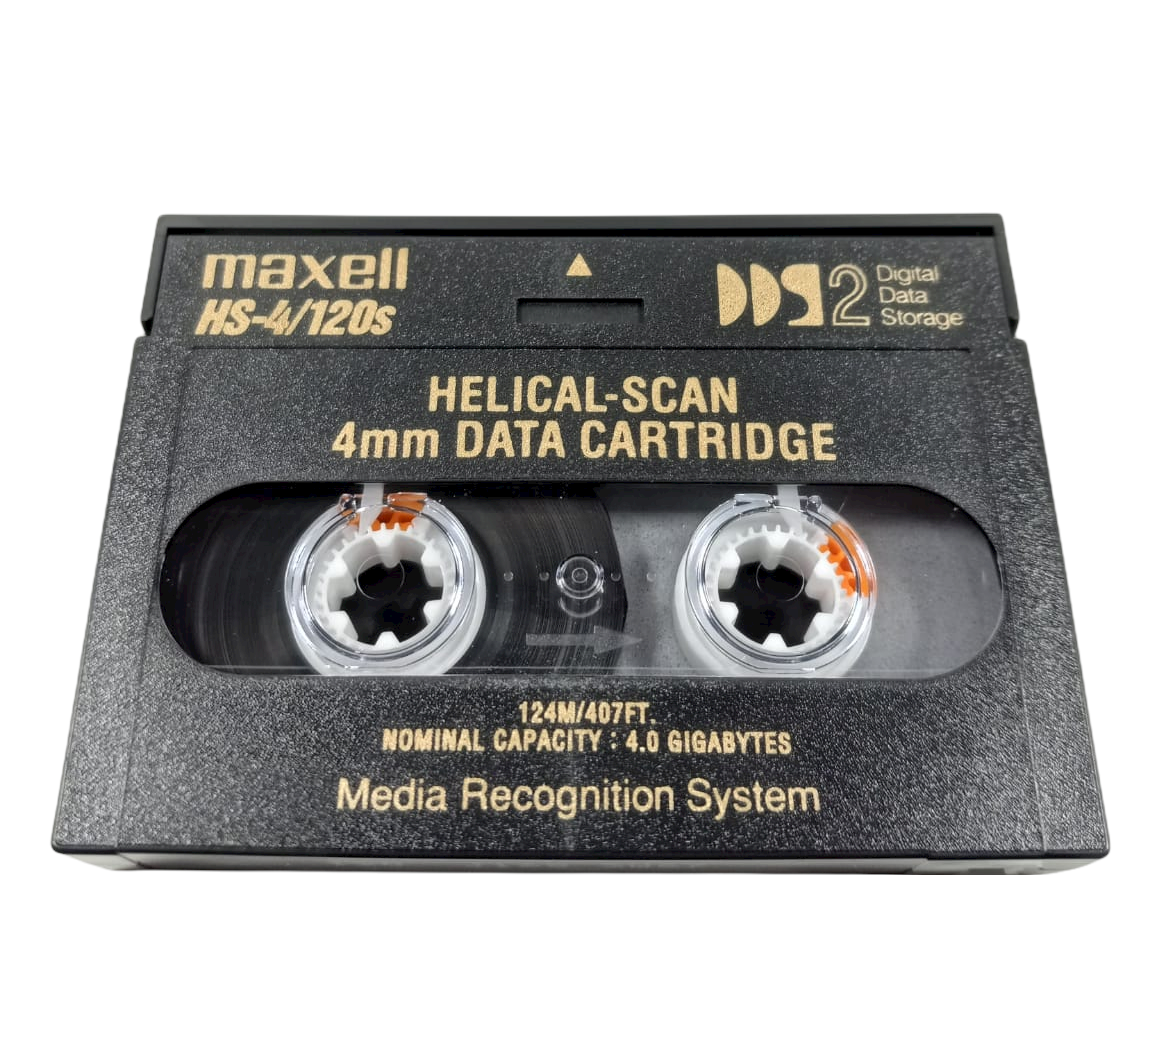 Primary image for Maxell HS-4/120s Helical-Scan 4mm Data Cartridge